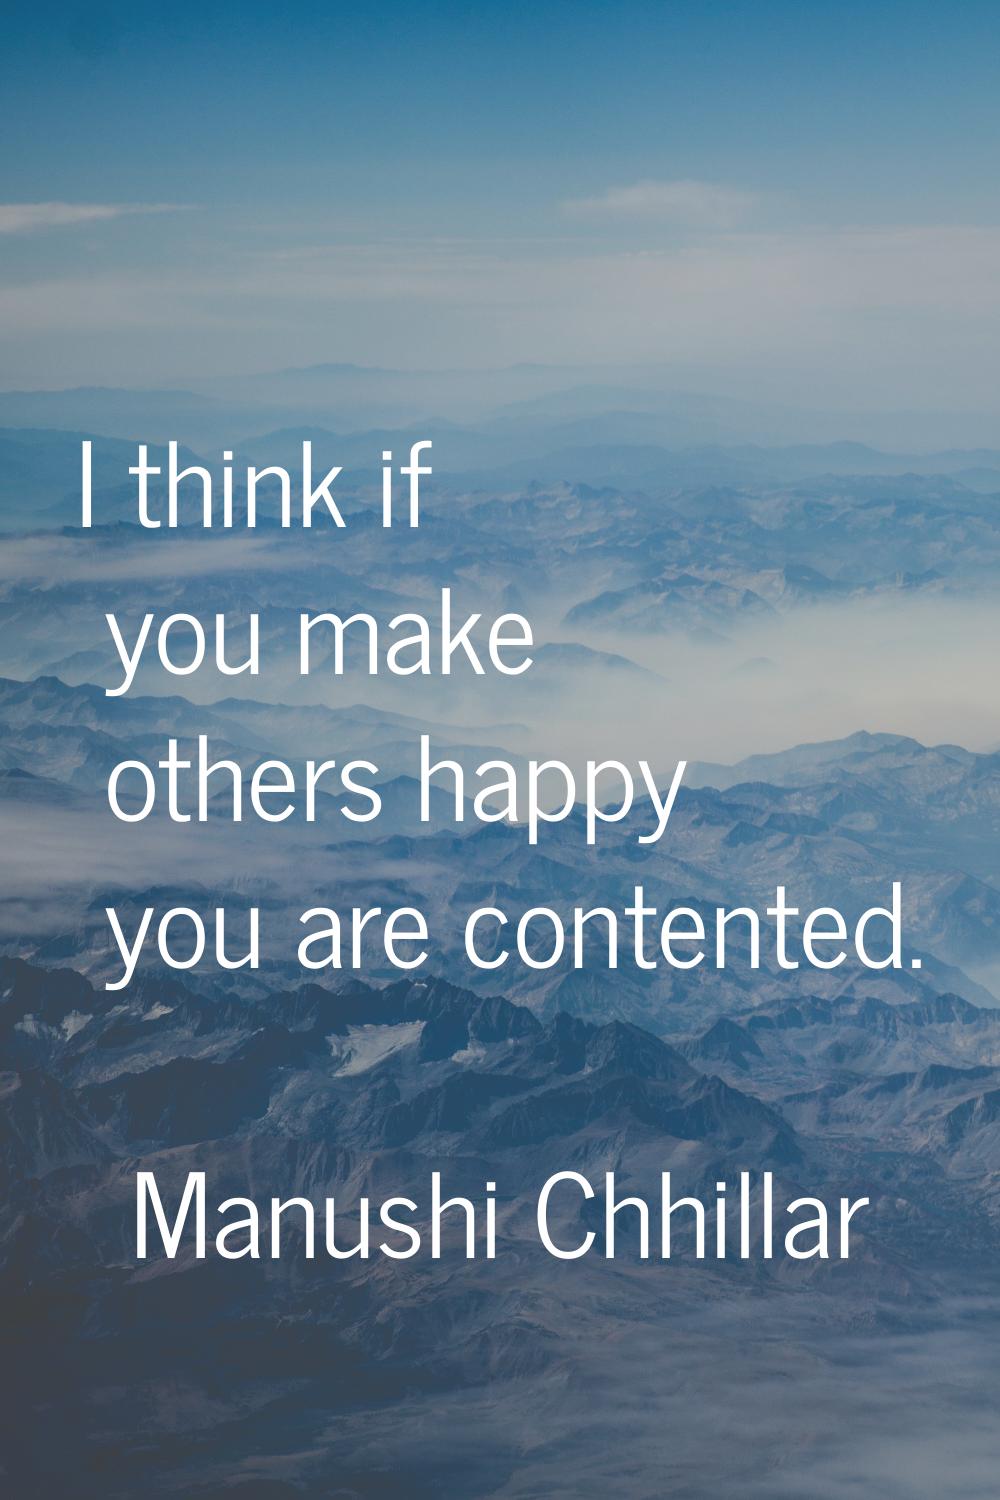 I think if you make others happy you are contented.